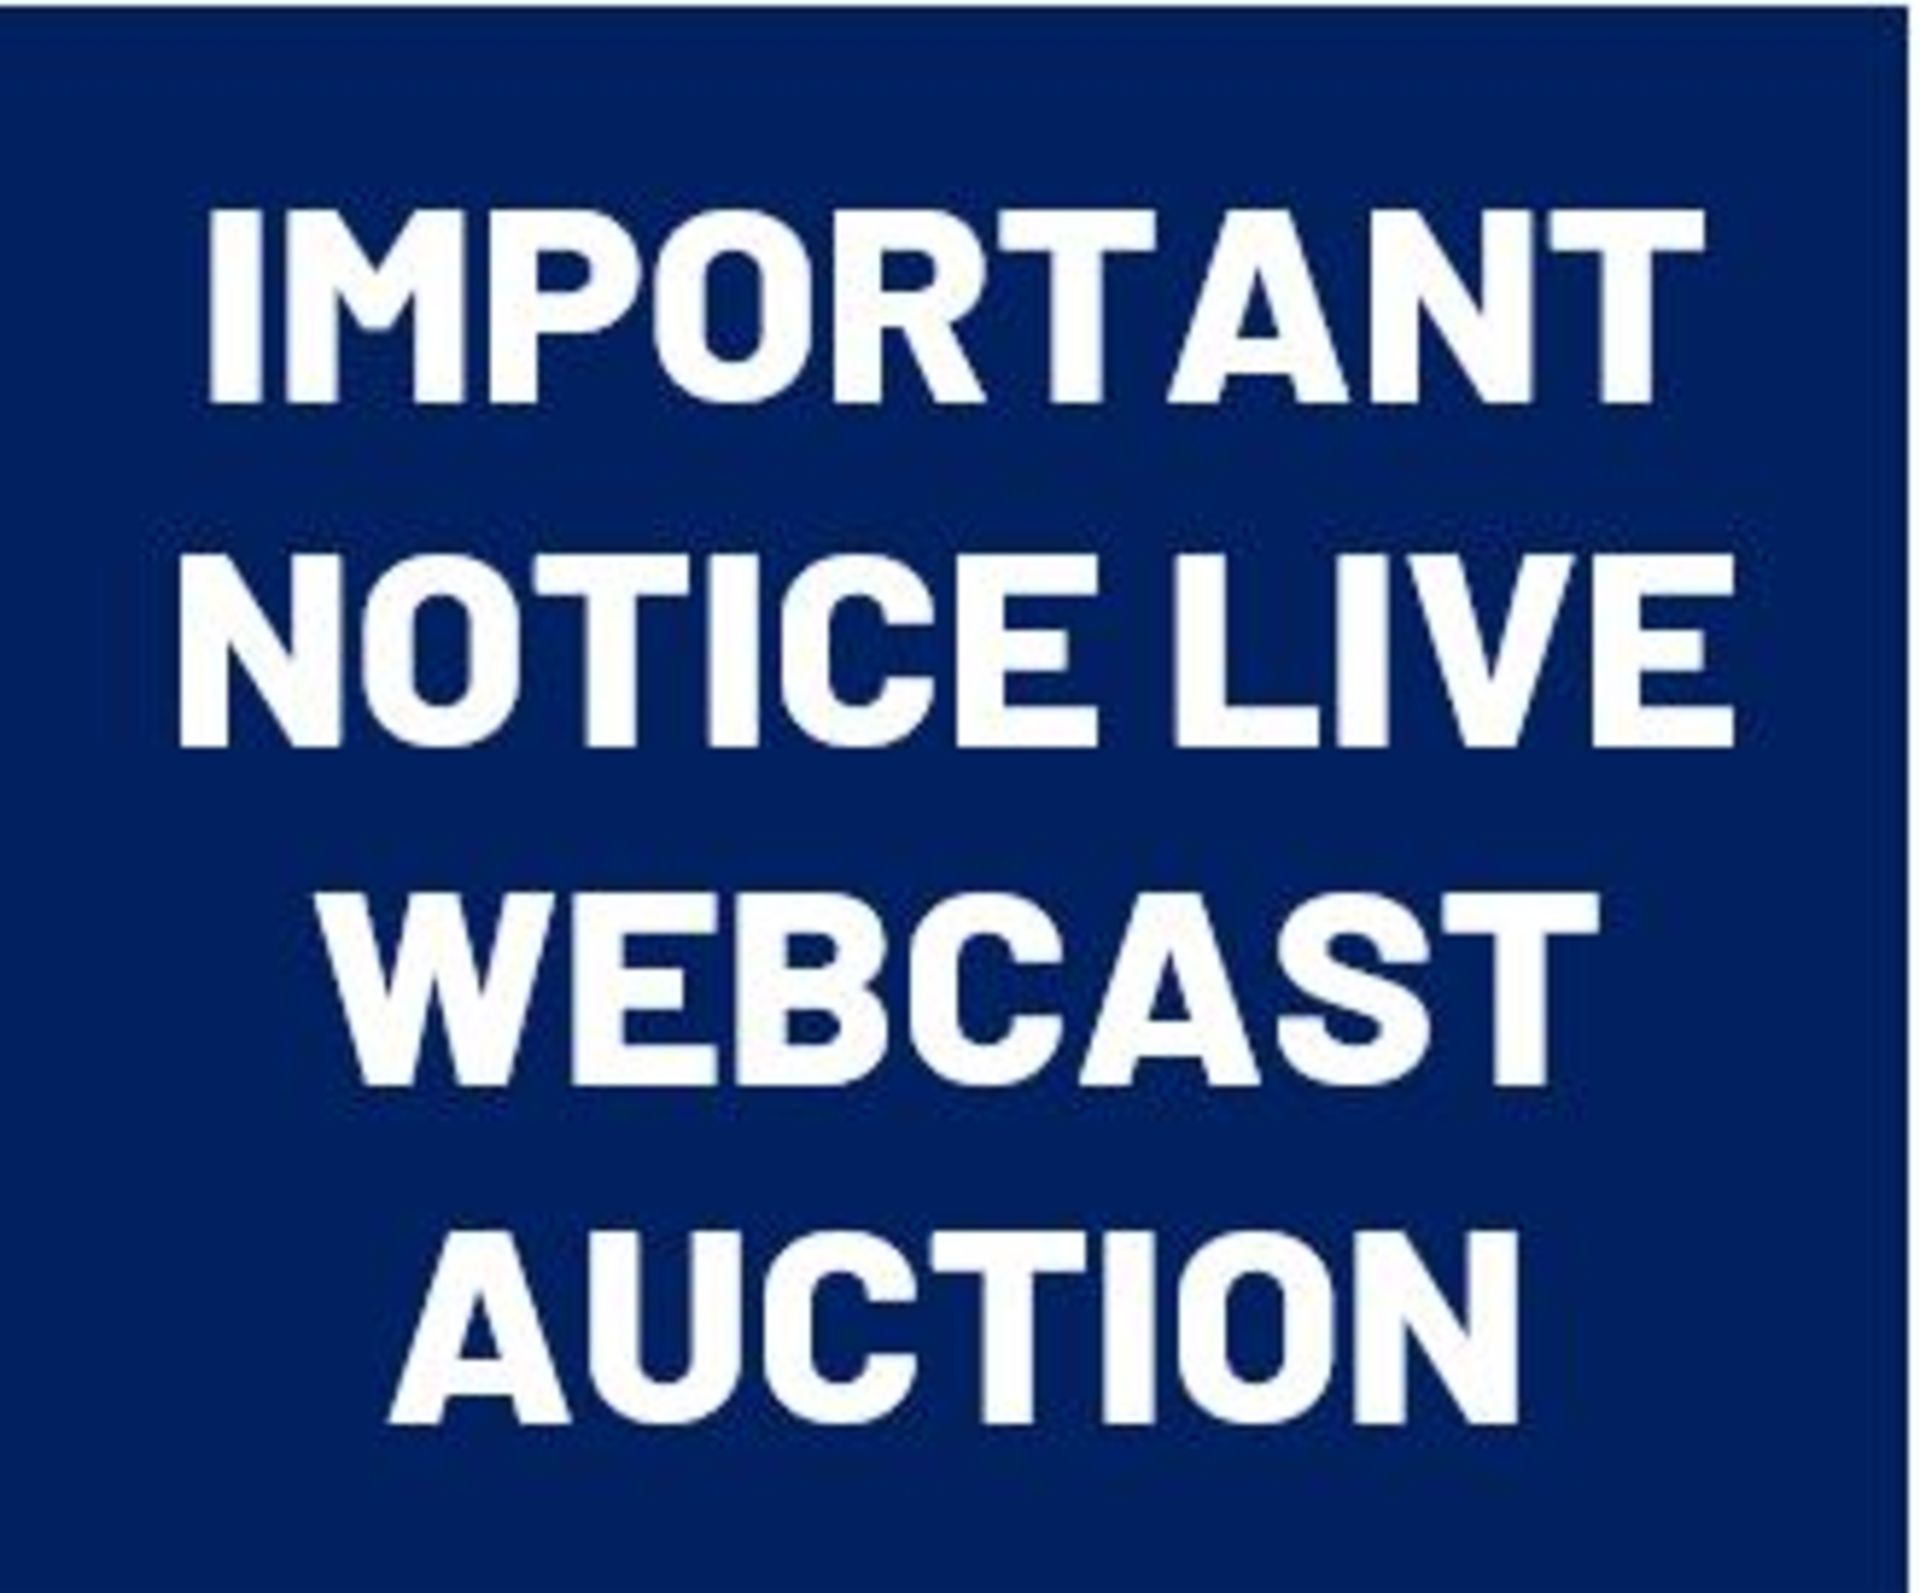 IMPORTANT NOTICE – This is a live webcast auction (not a timed online auction). You must click the